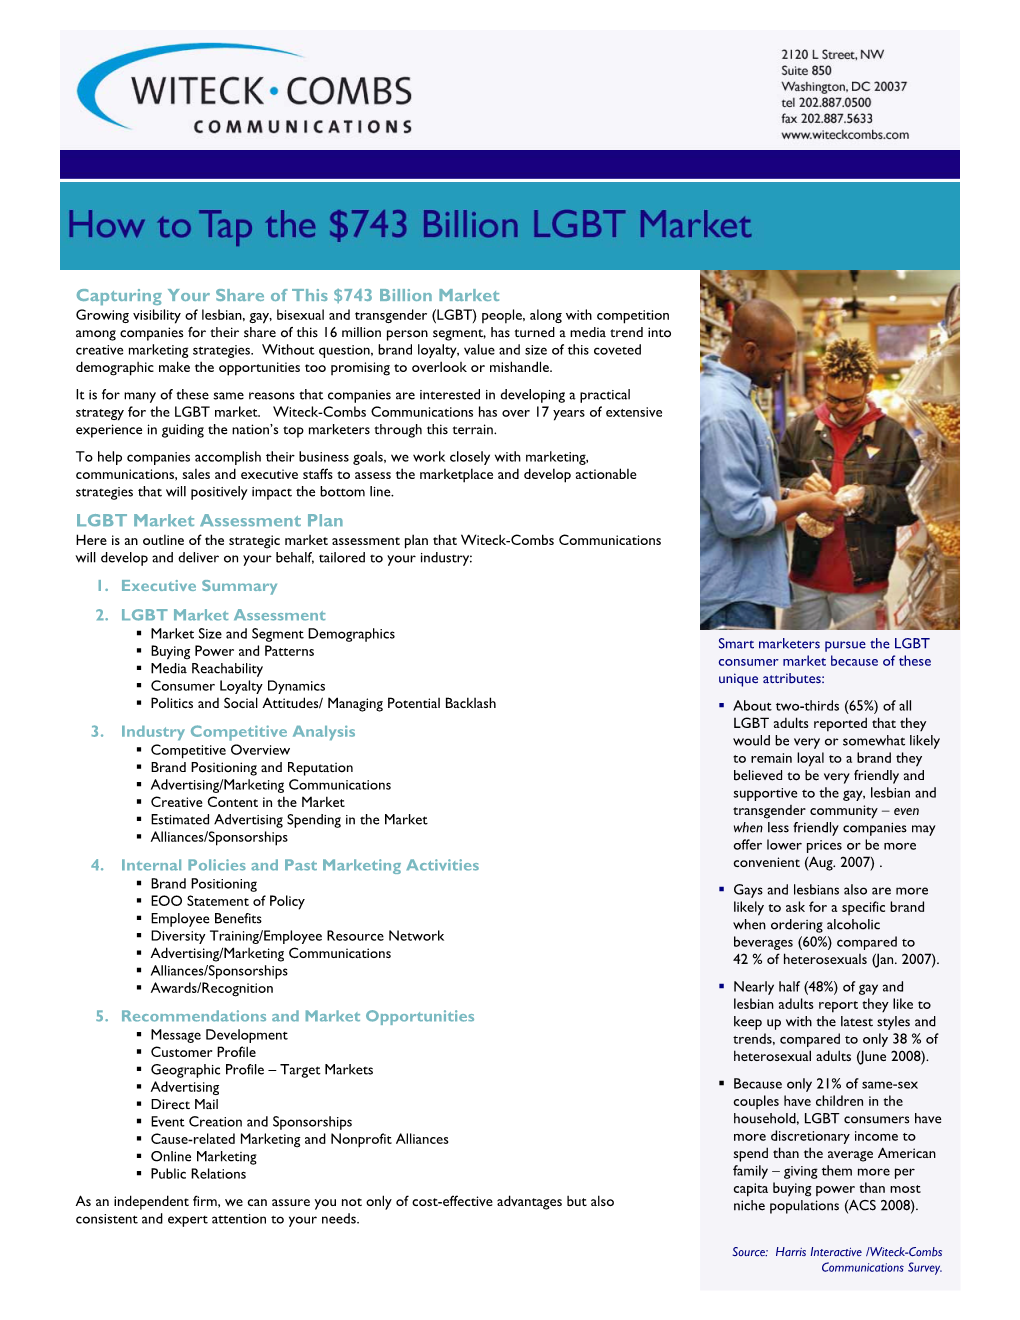 How to Tap the $743 Billion LGBT Market